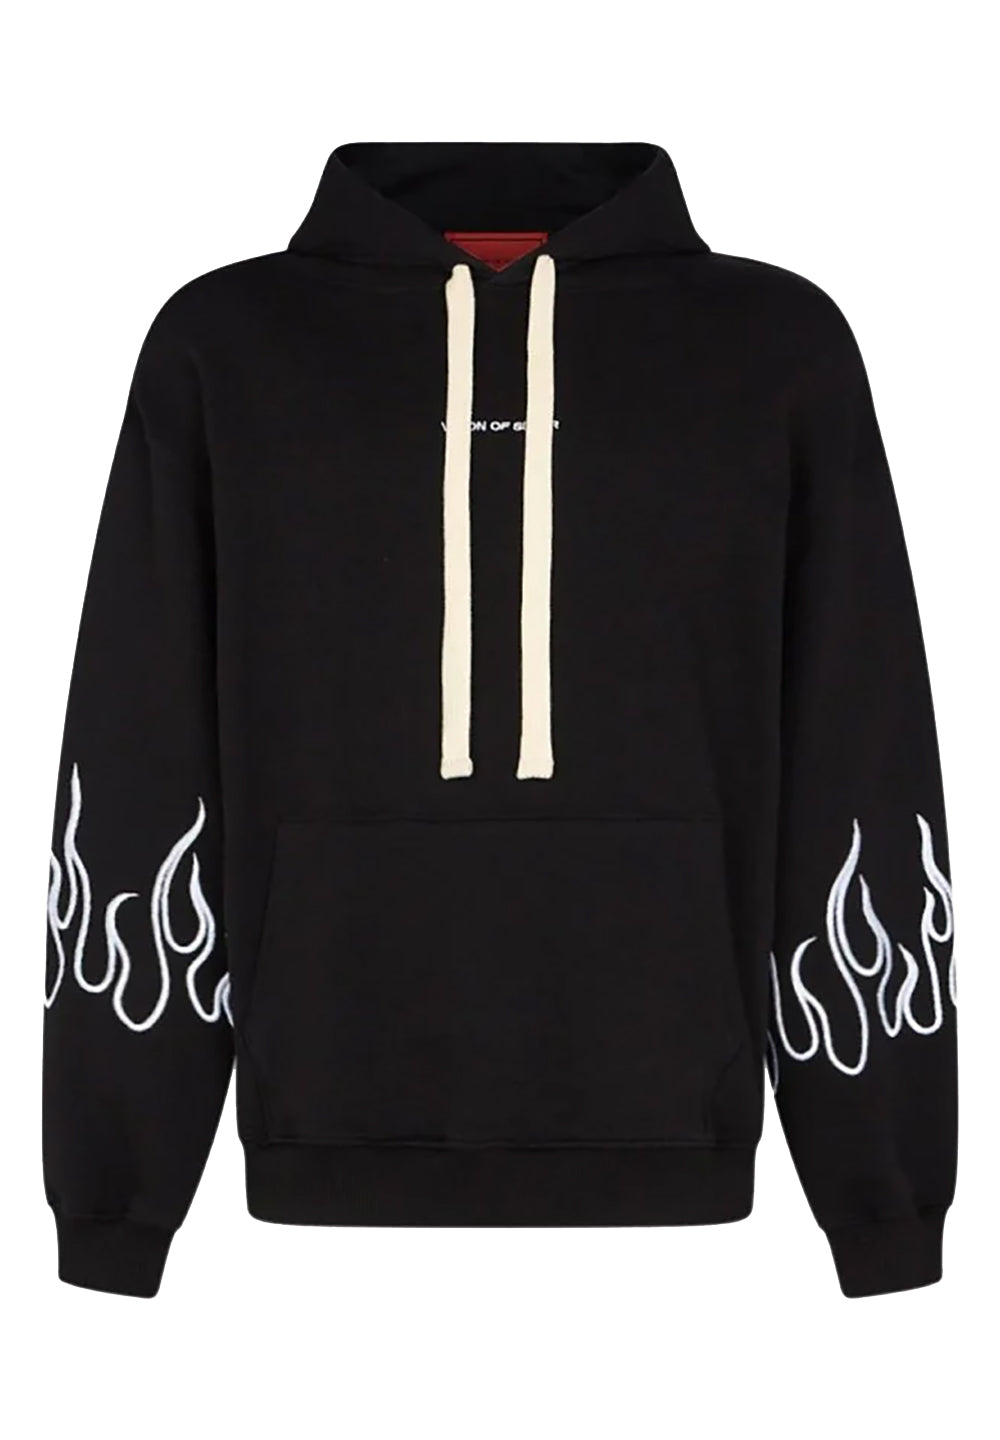 Hoodie with White Embroidered Flames